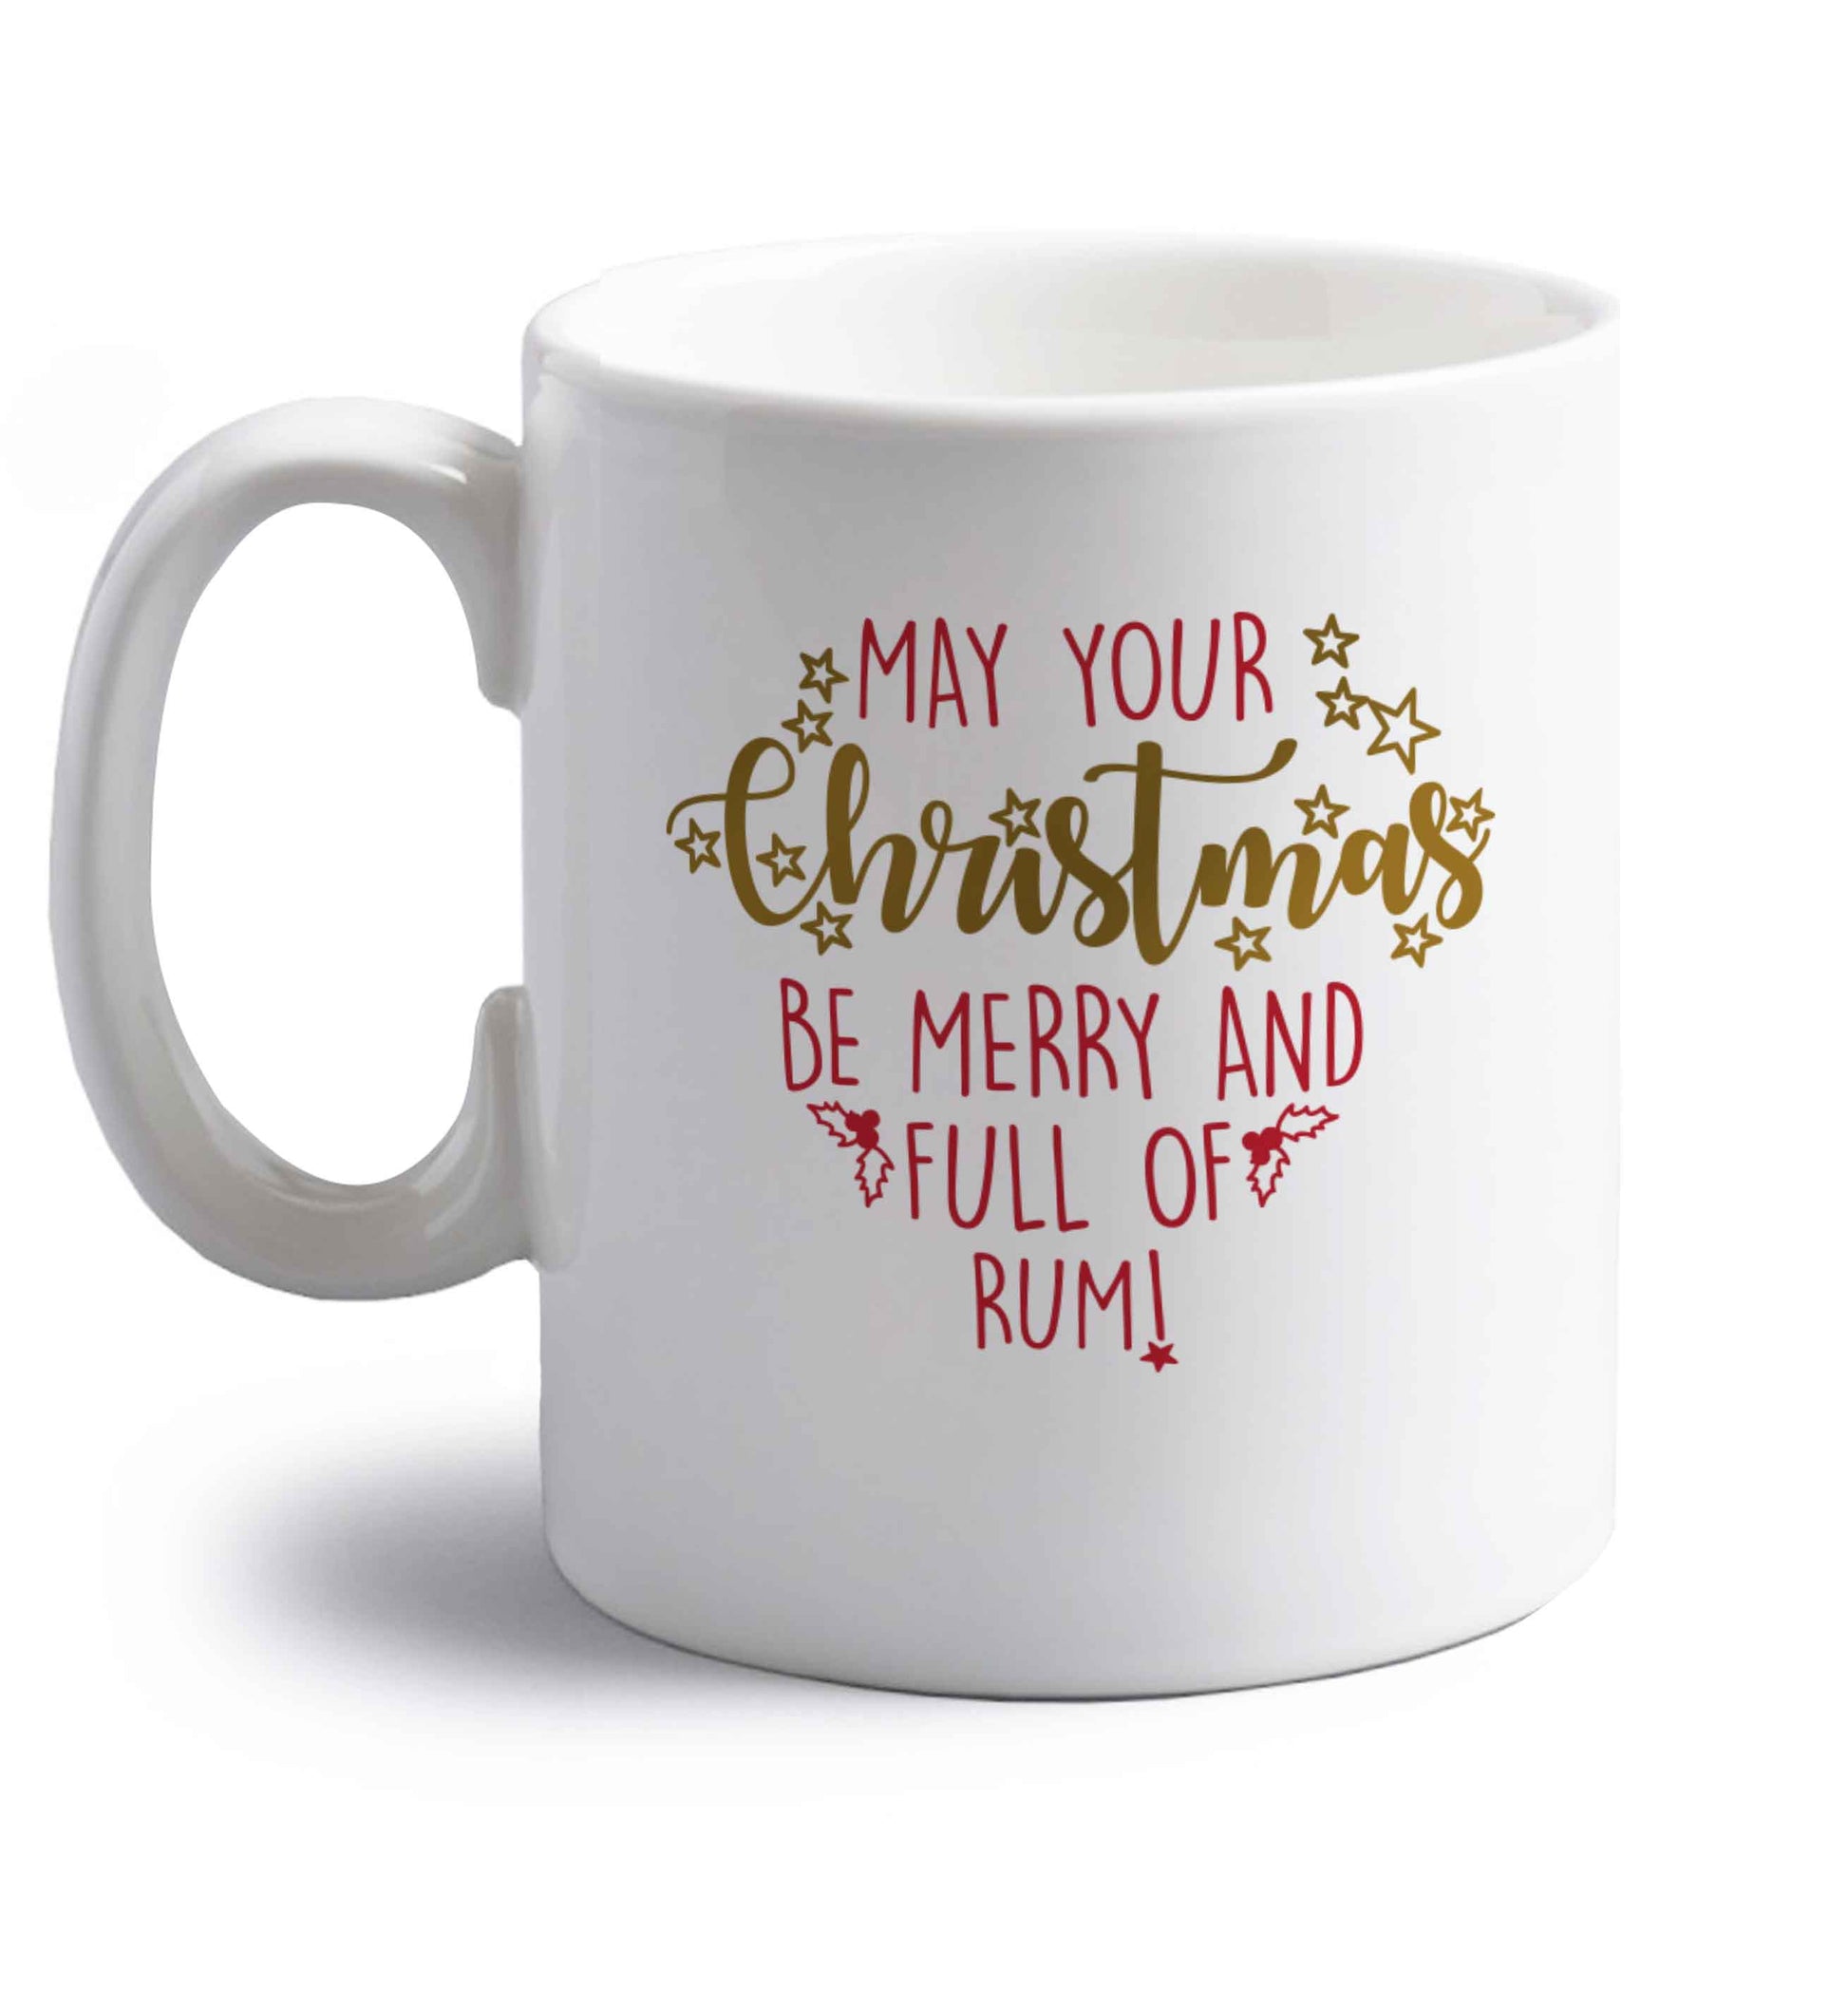 May your Christmas be merry and full of rum right handed white ceramic mug 